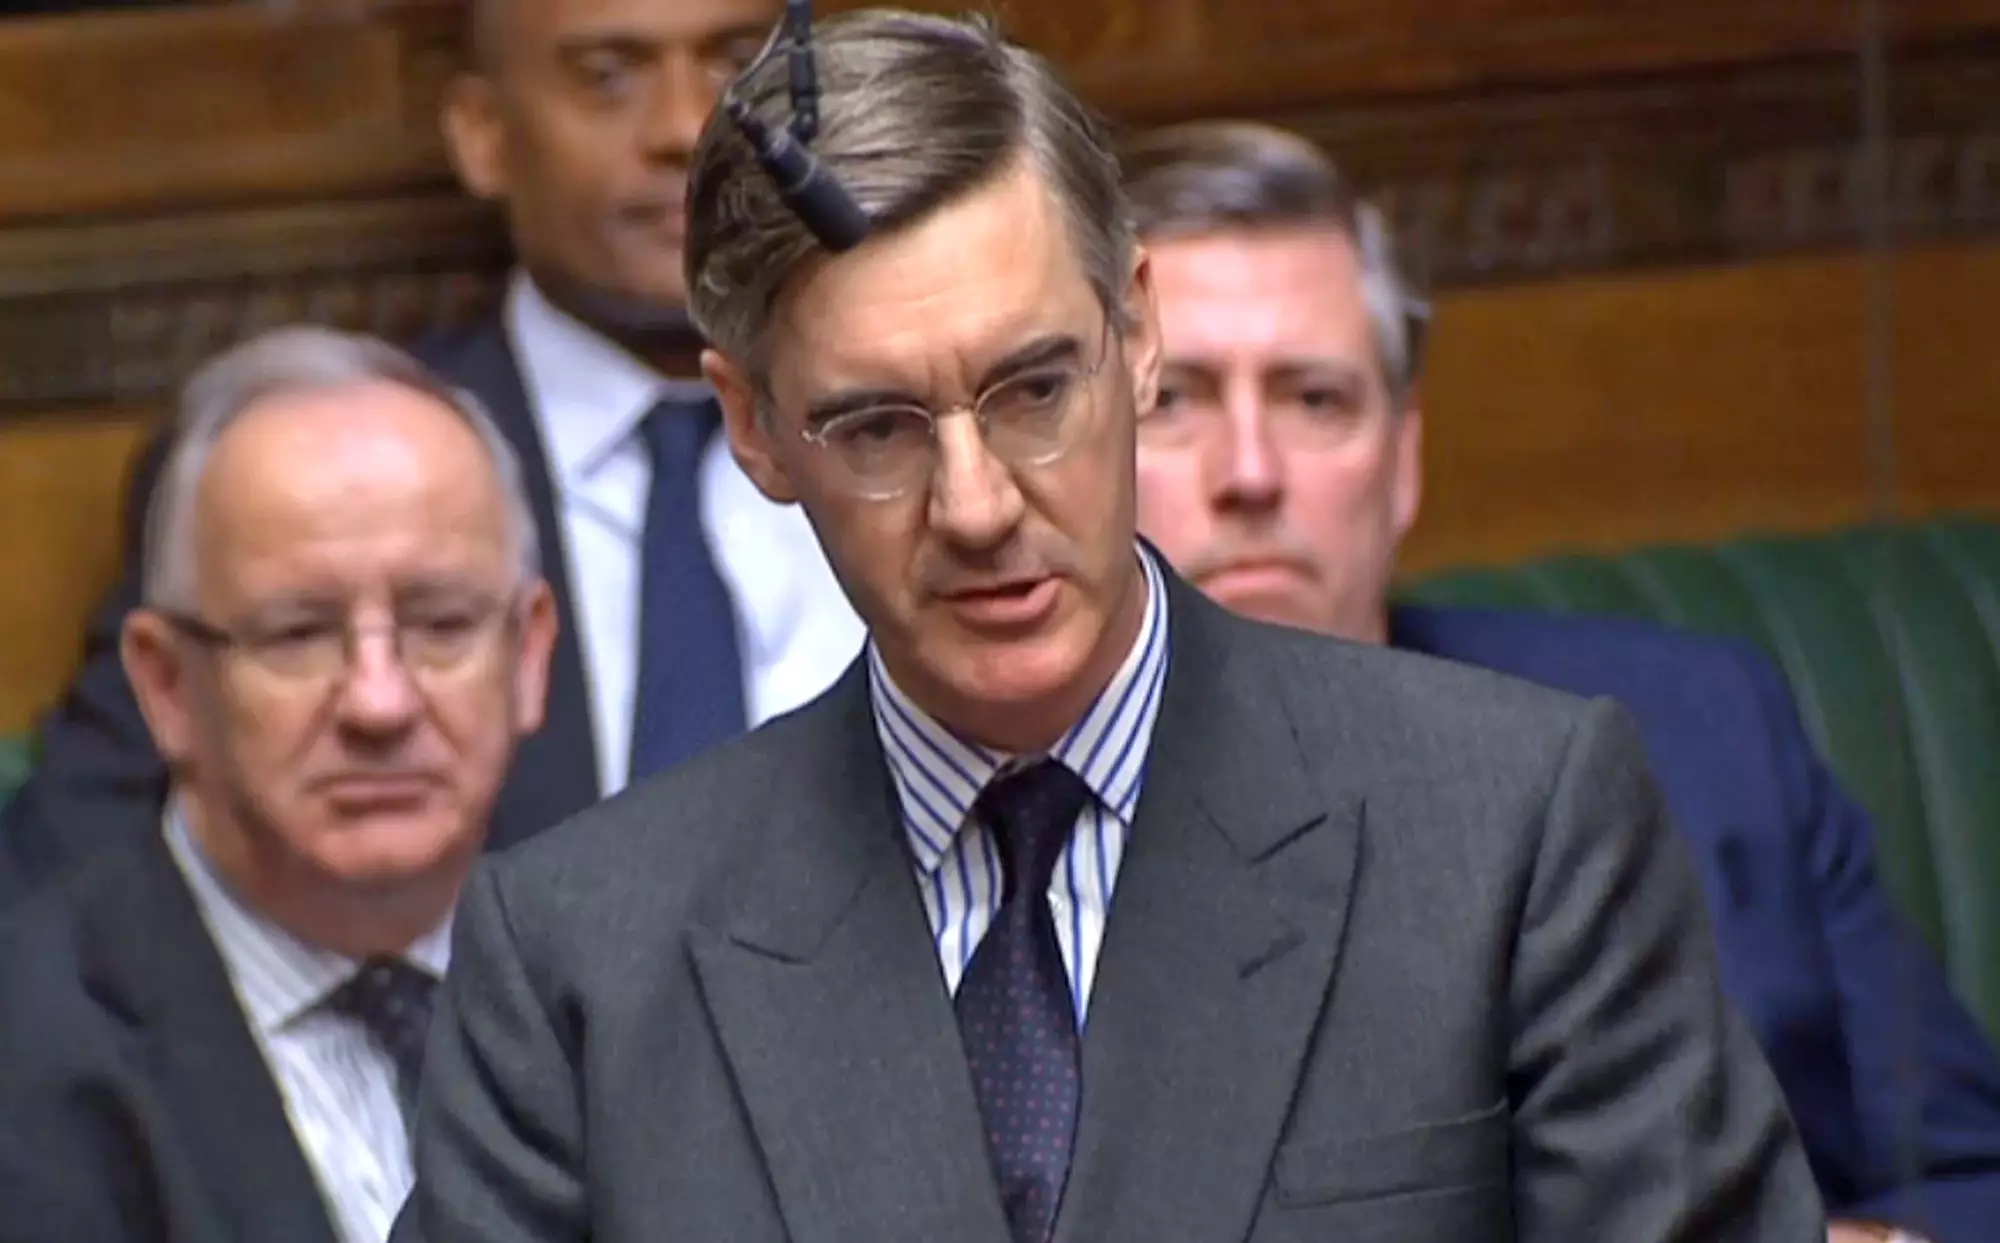 Jacob Rees-Mogg is reported to have called for a vote of no confidence.